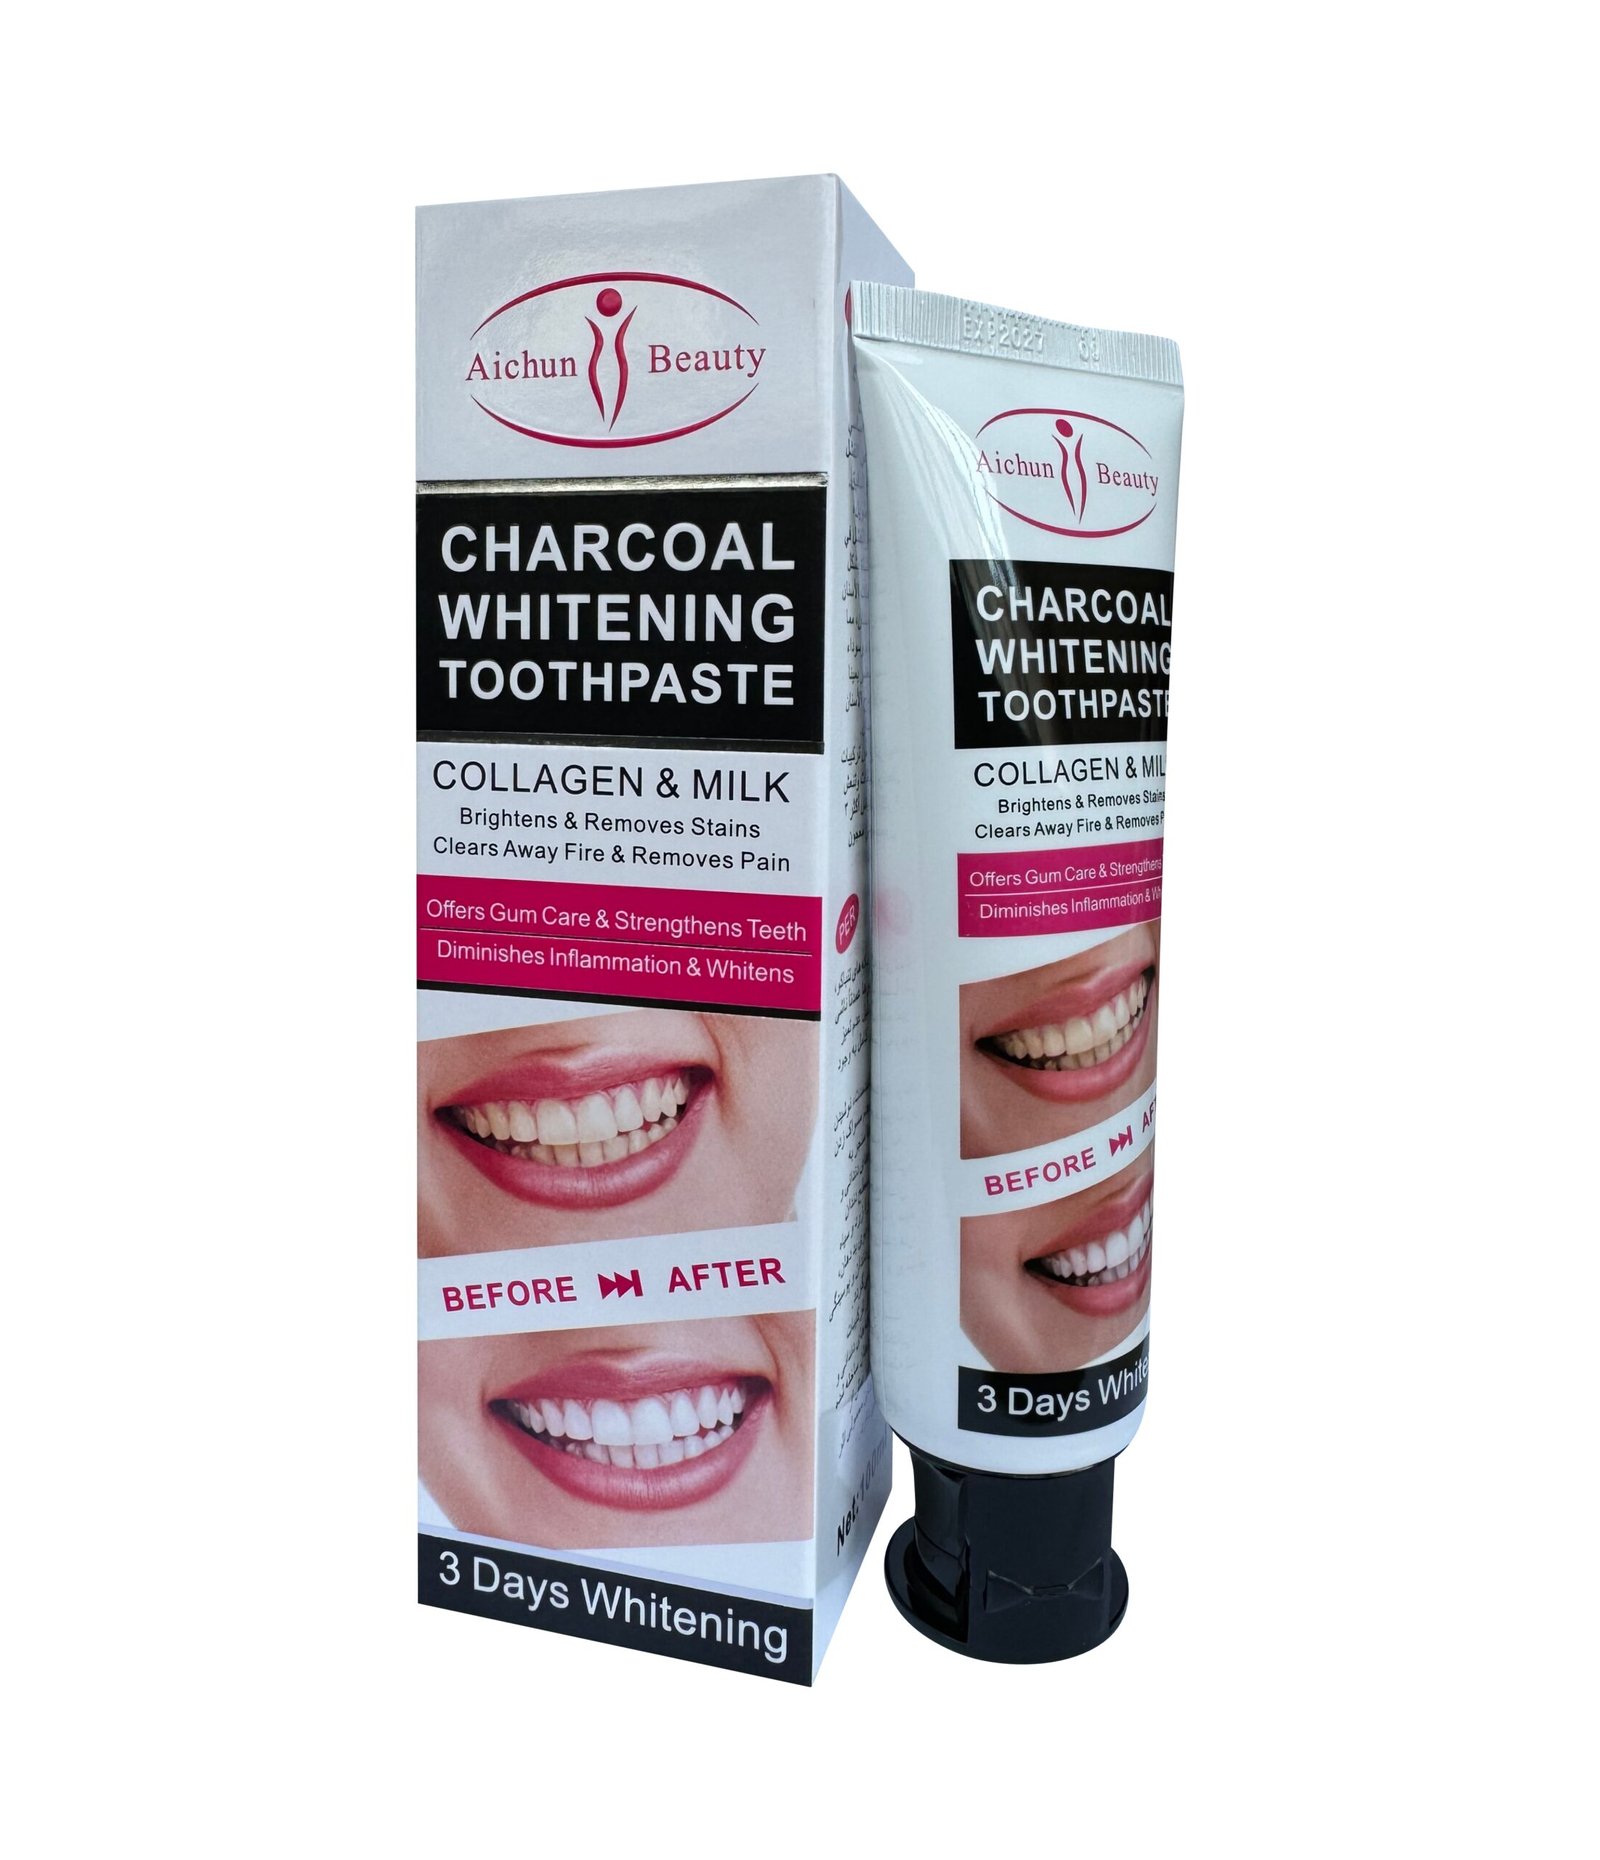 Charcoal Whitening Toothpaste